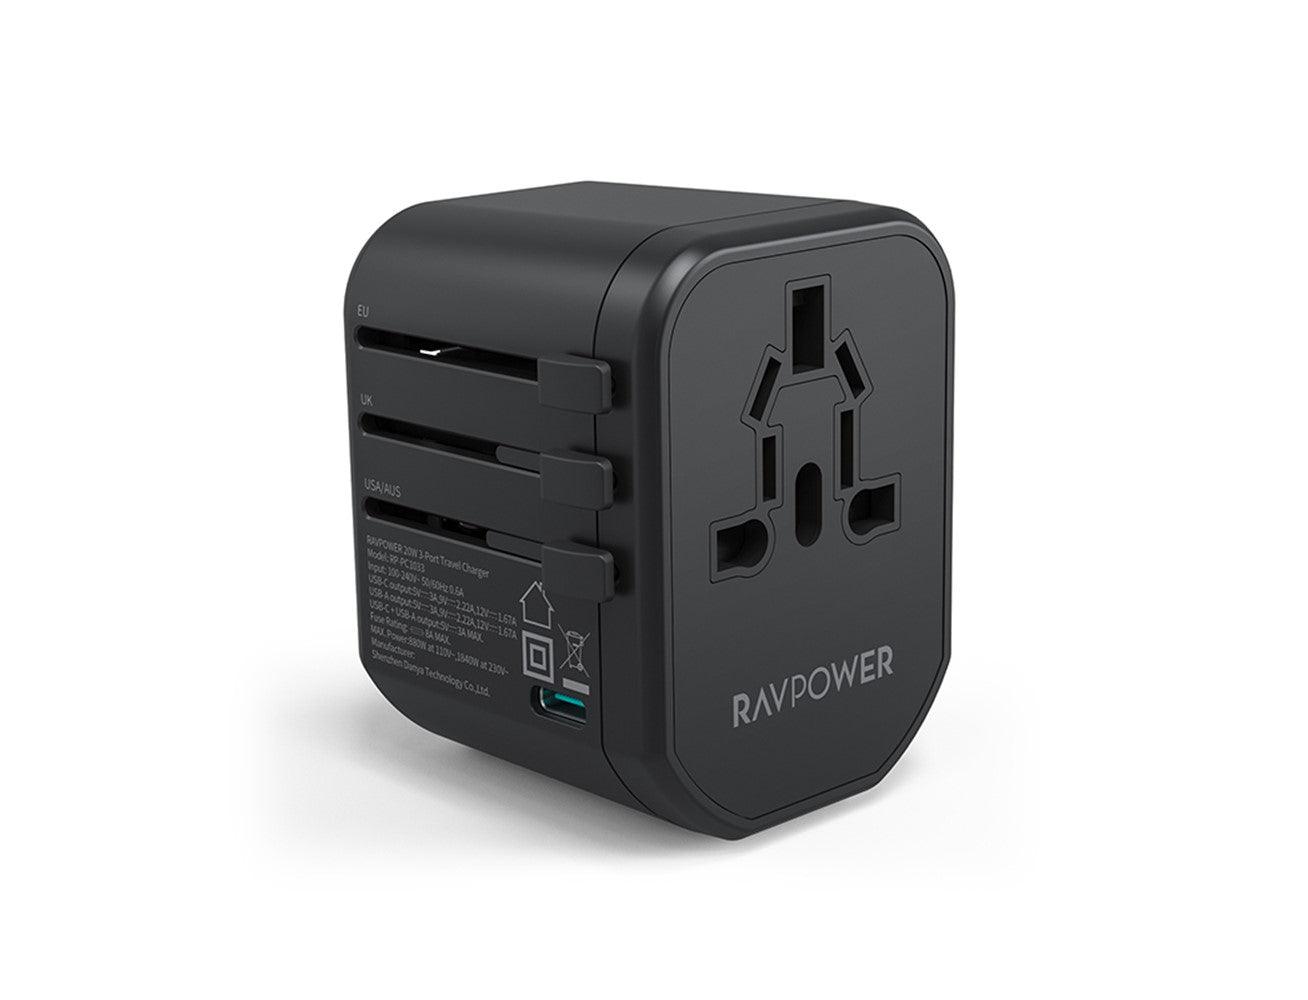 Ravpower RP-PC1033 Pd Pioneer 20 Watts 3-Port Travel Charger - Future Store